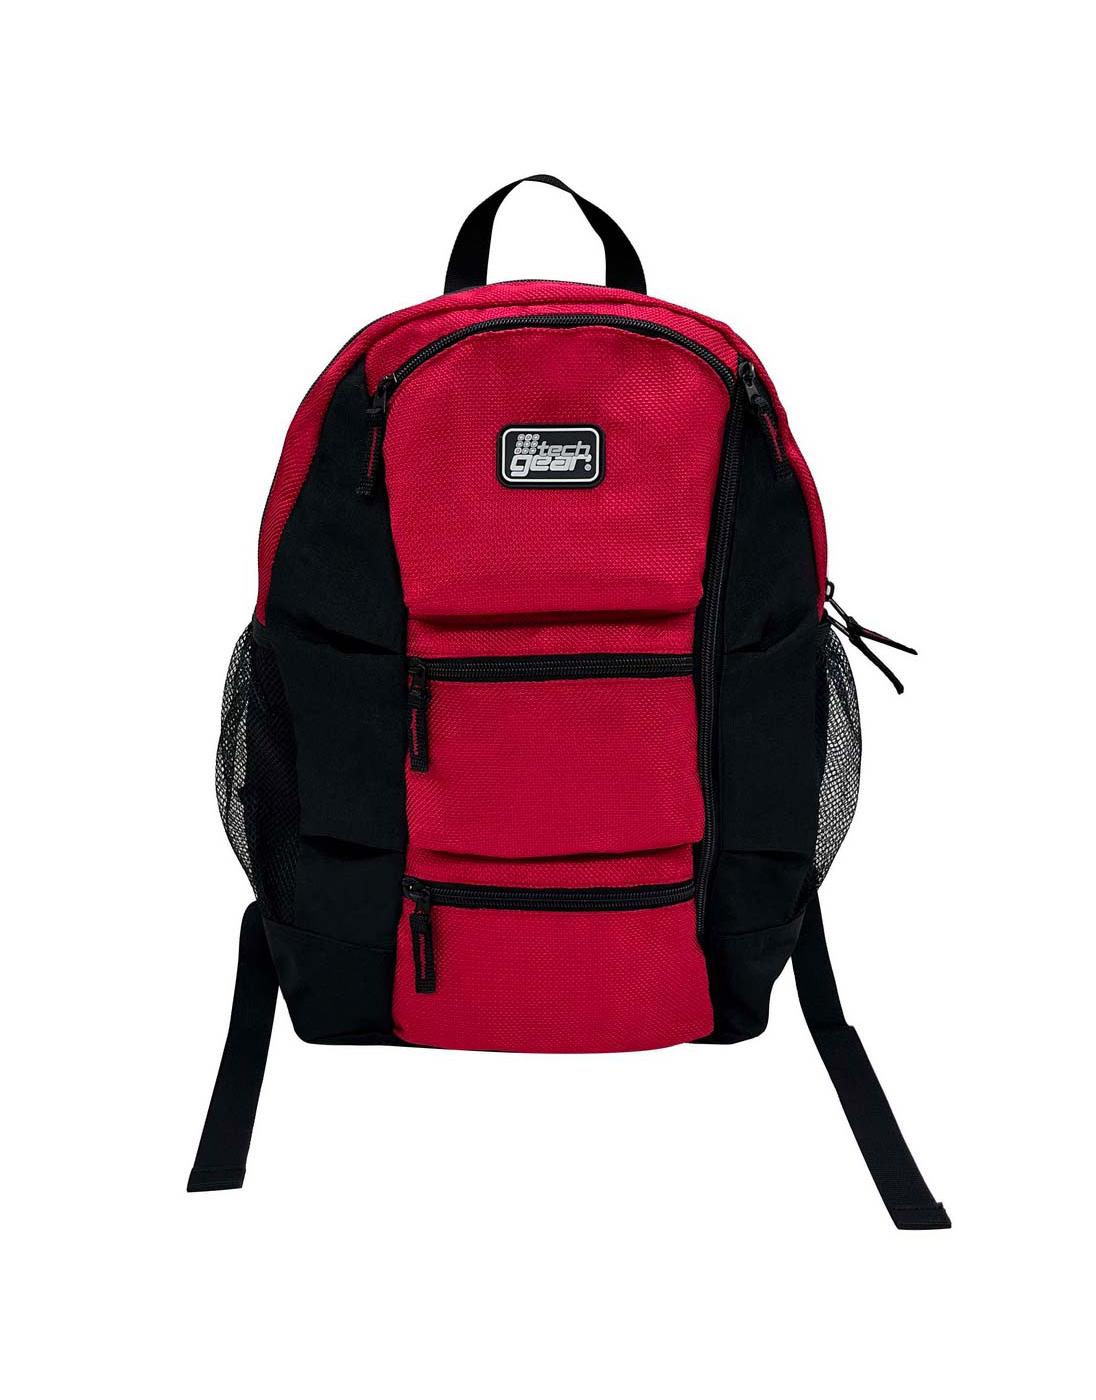 Tech Gear Downtown Backpack - Black & Red; image 1 of 3